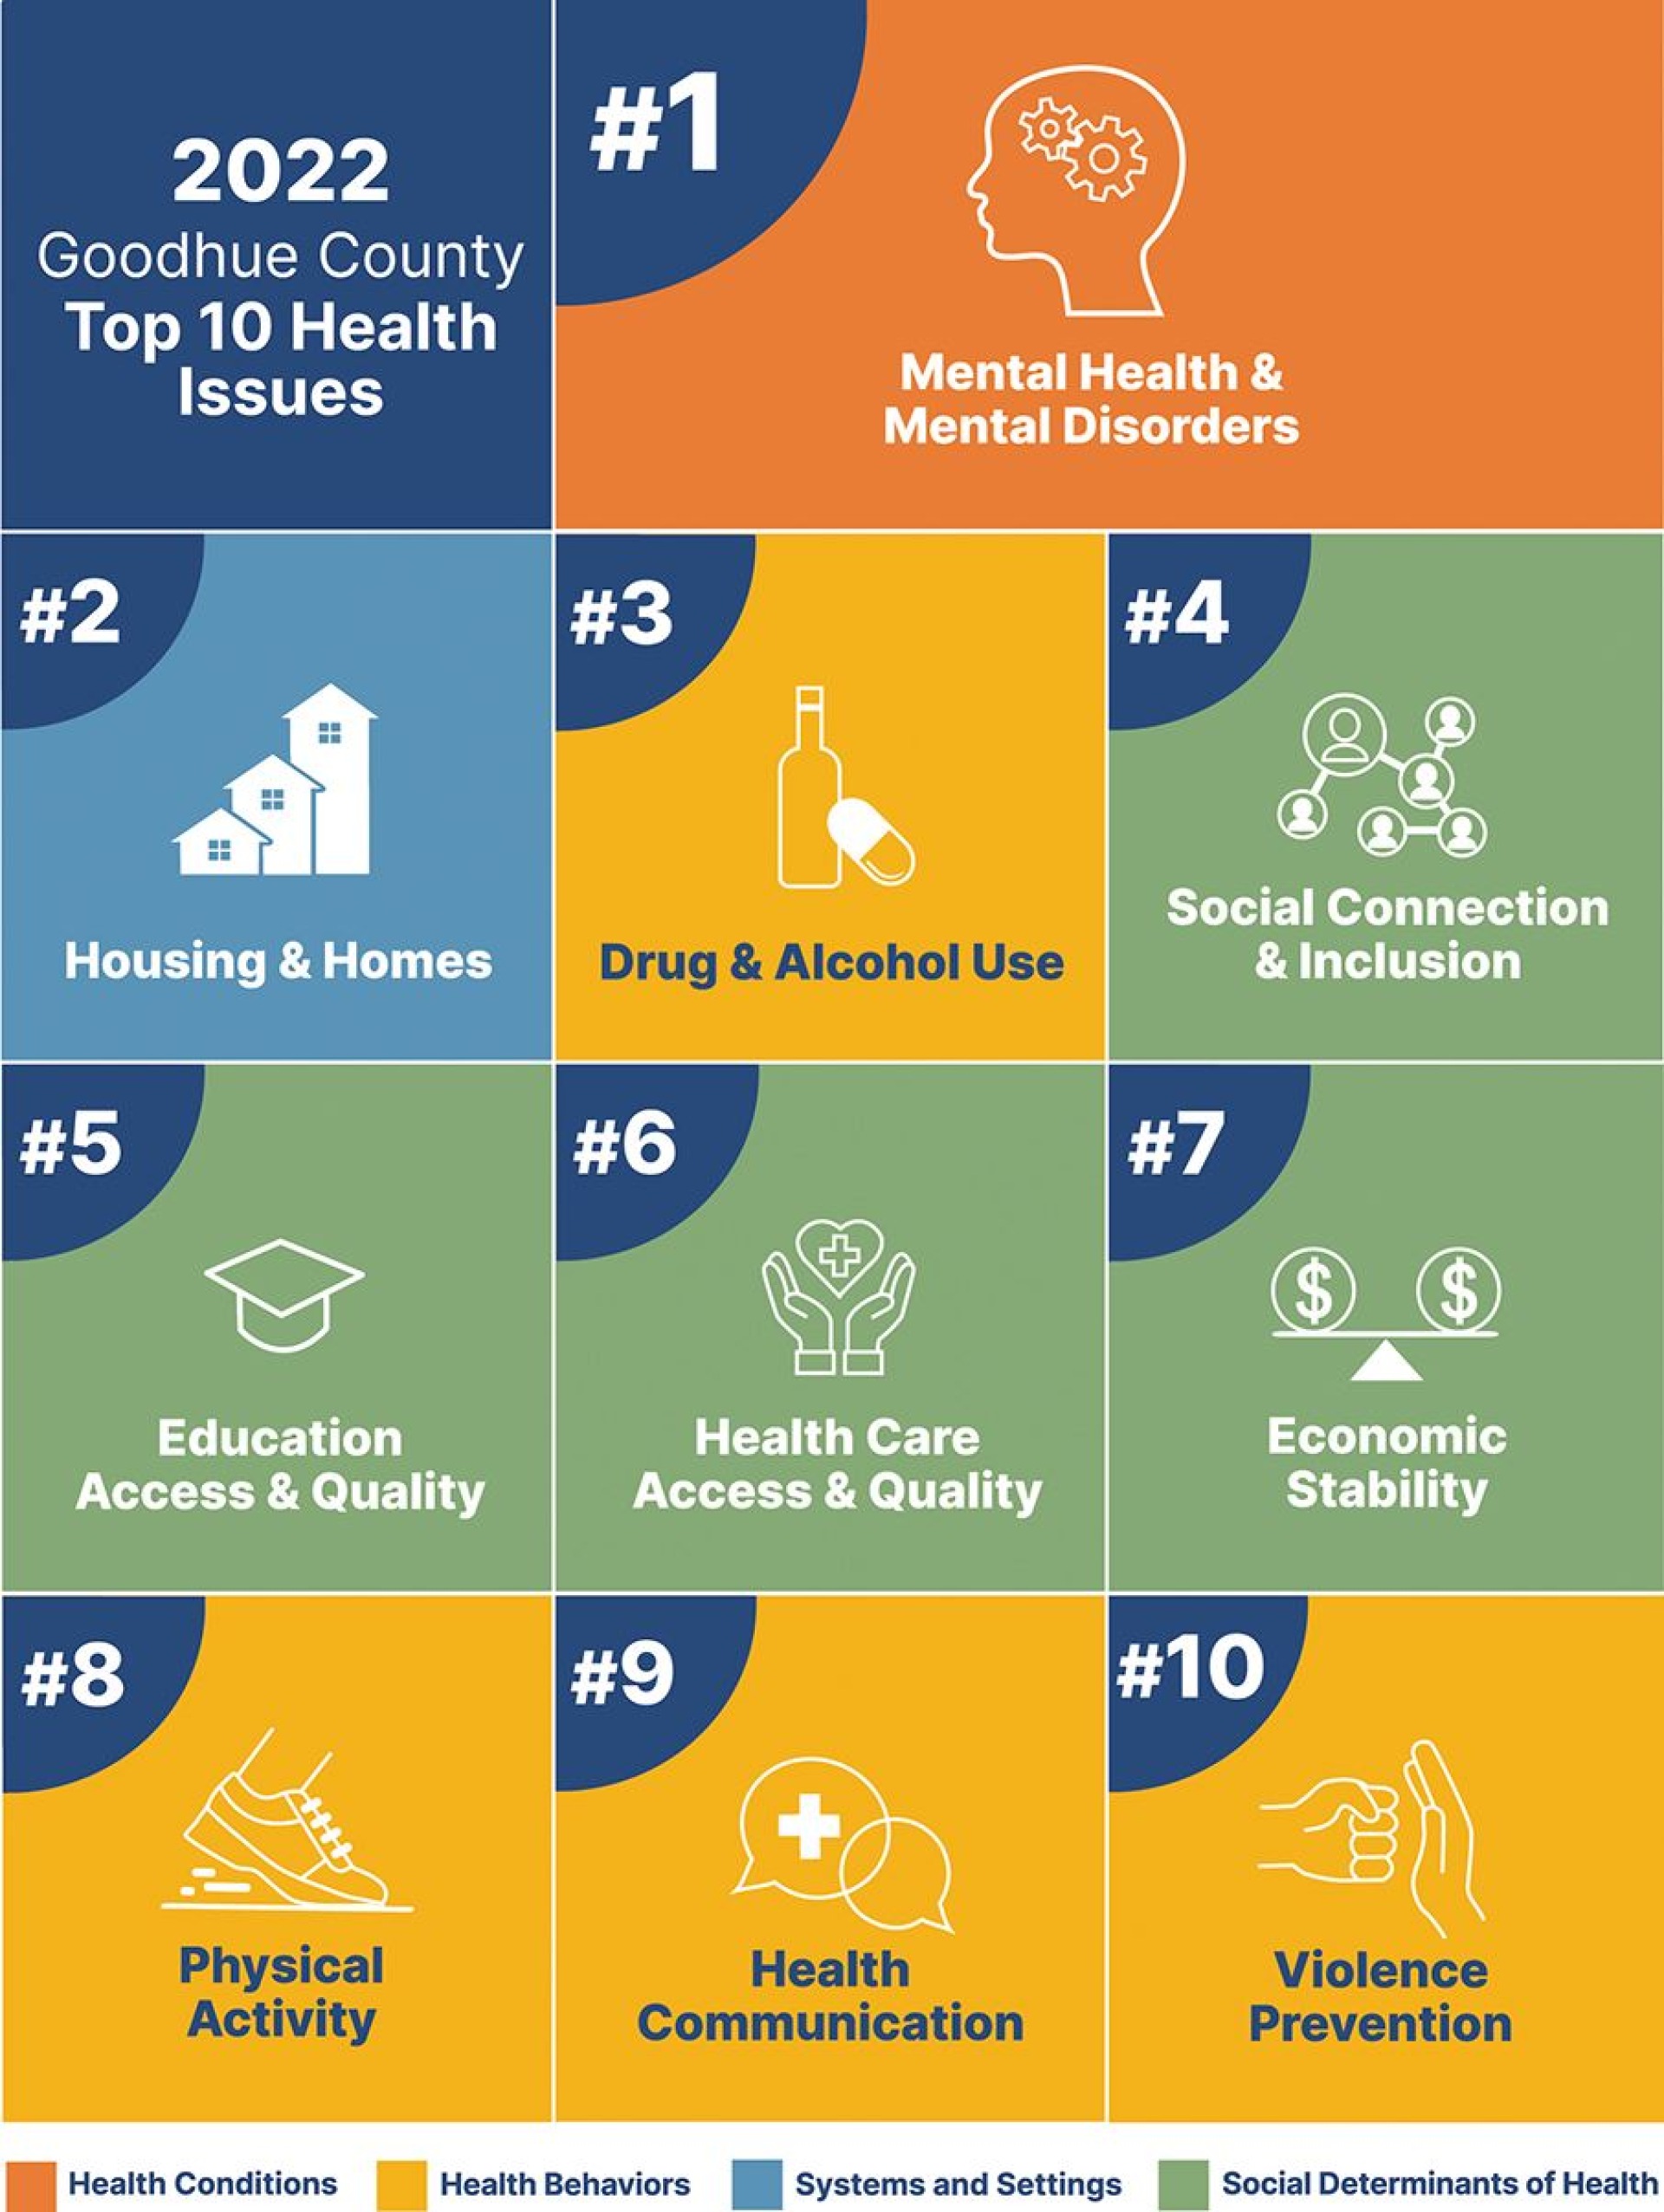 2022 Goodhue County Top 10 Health Issues